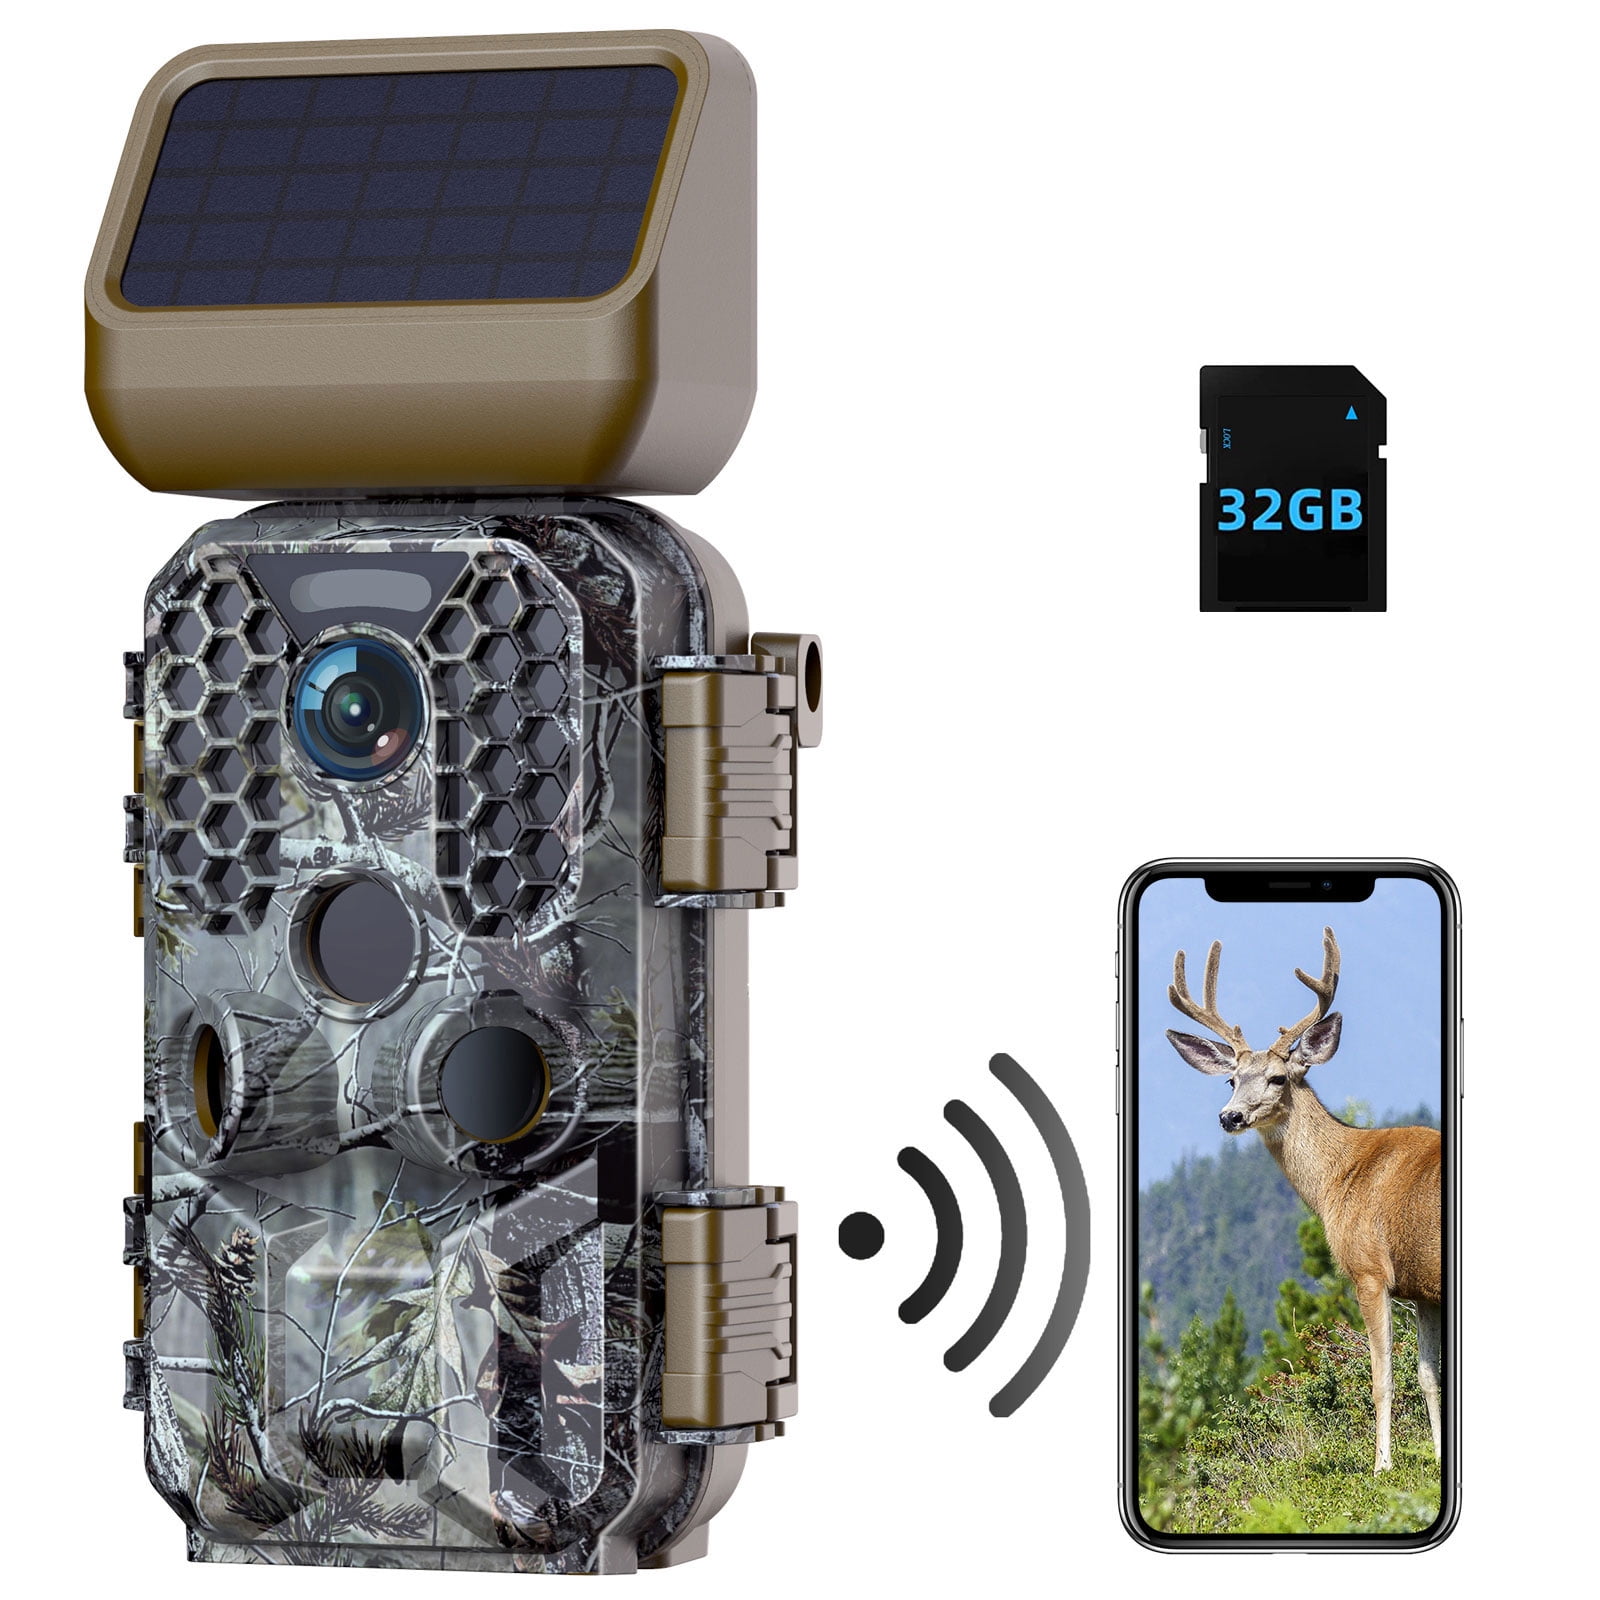 Trail Camera Solar Powered 36MP 4K Native WiFi Bluetooth Game Camera with 120°Wide-Angle Motion 3 PIR Sensor 0.1s Trigger Time Trail Camera with Night Vision IP66 Waterproof for Wildlife Monitoring 